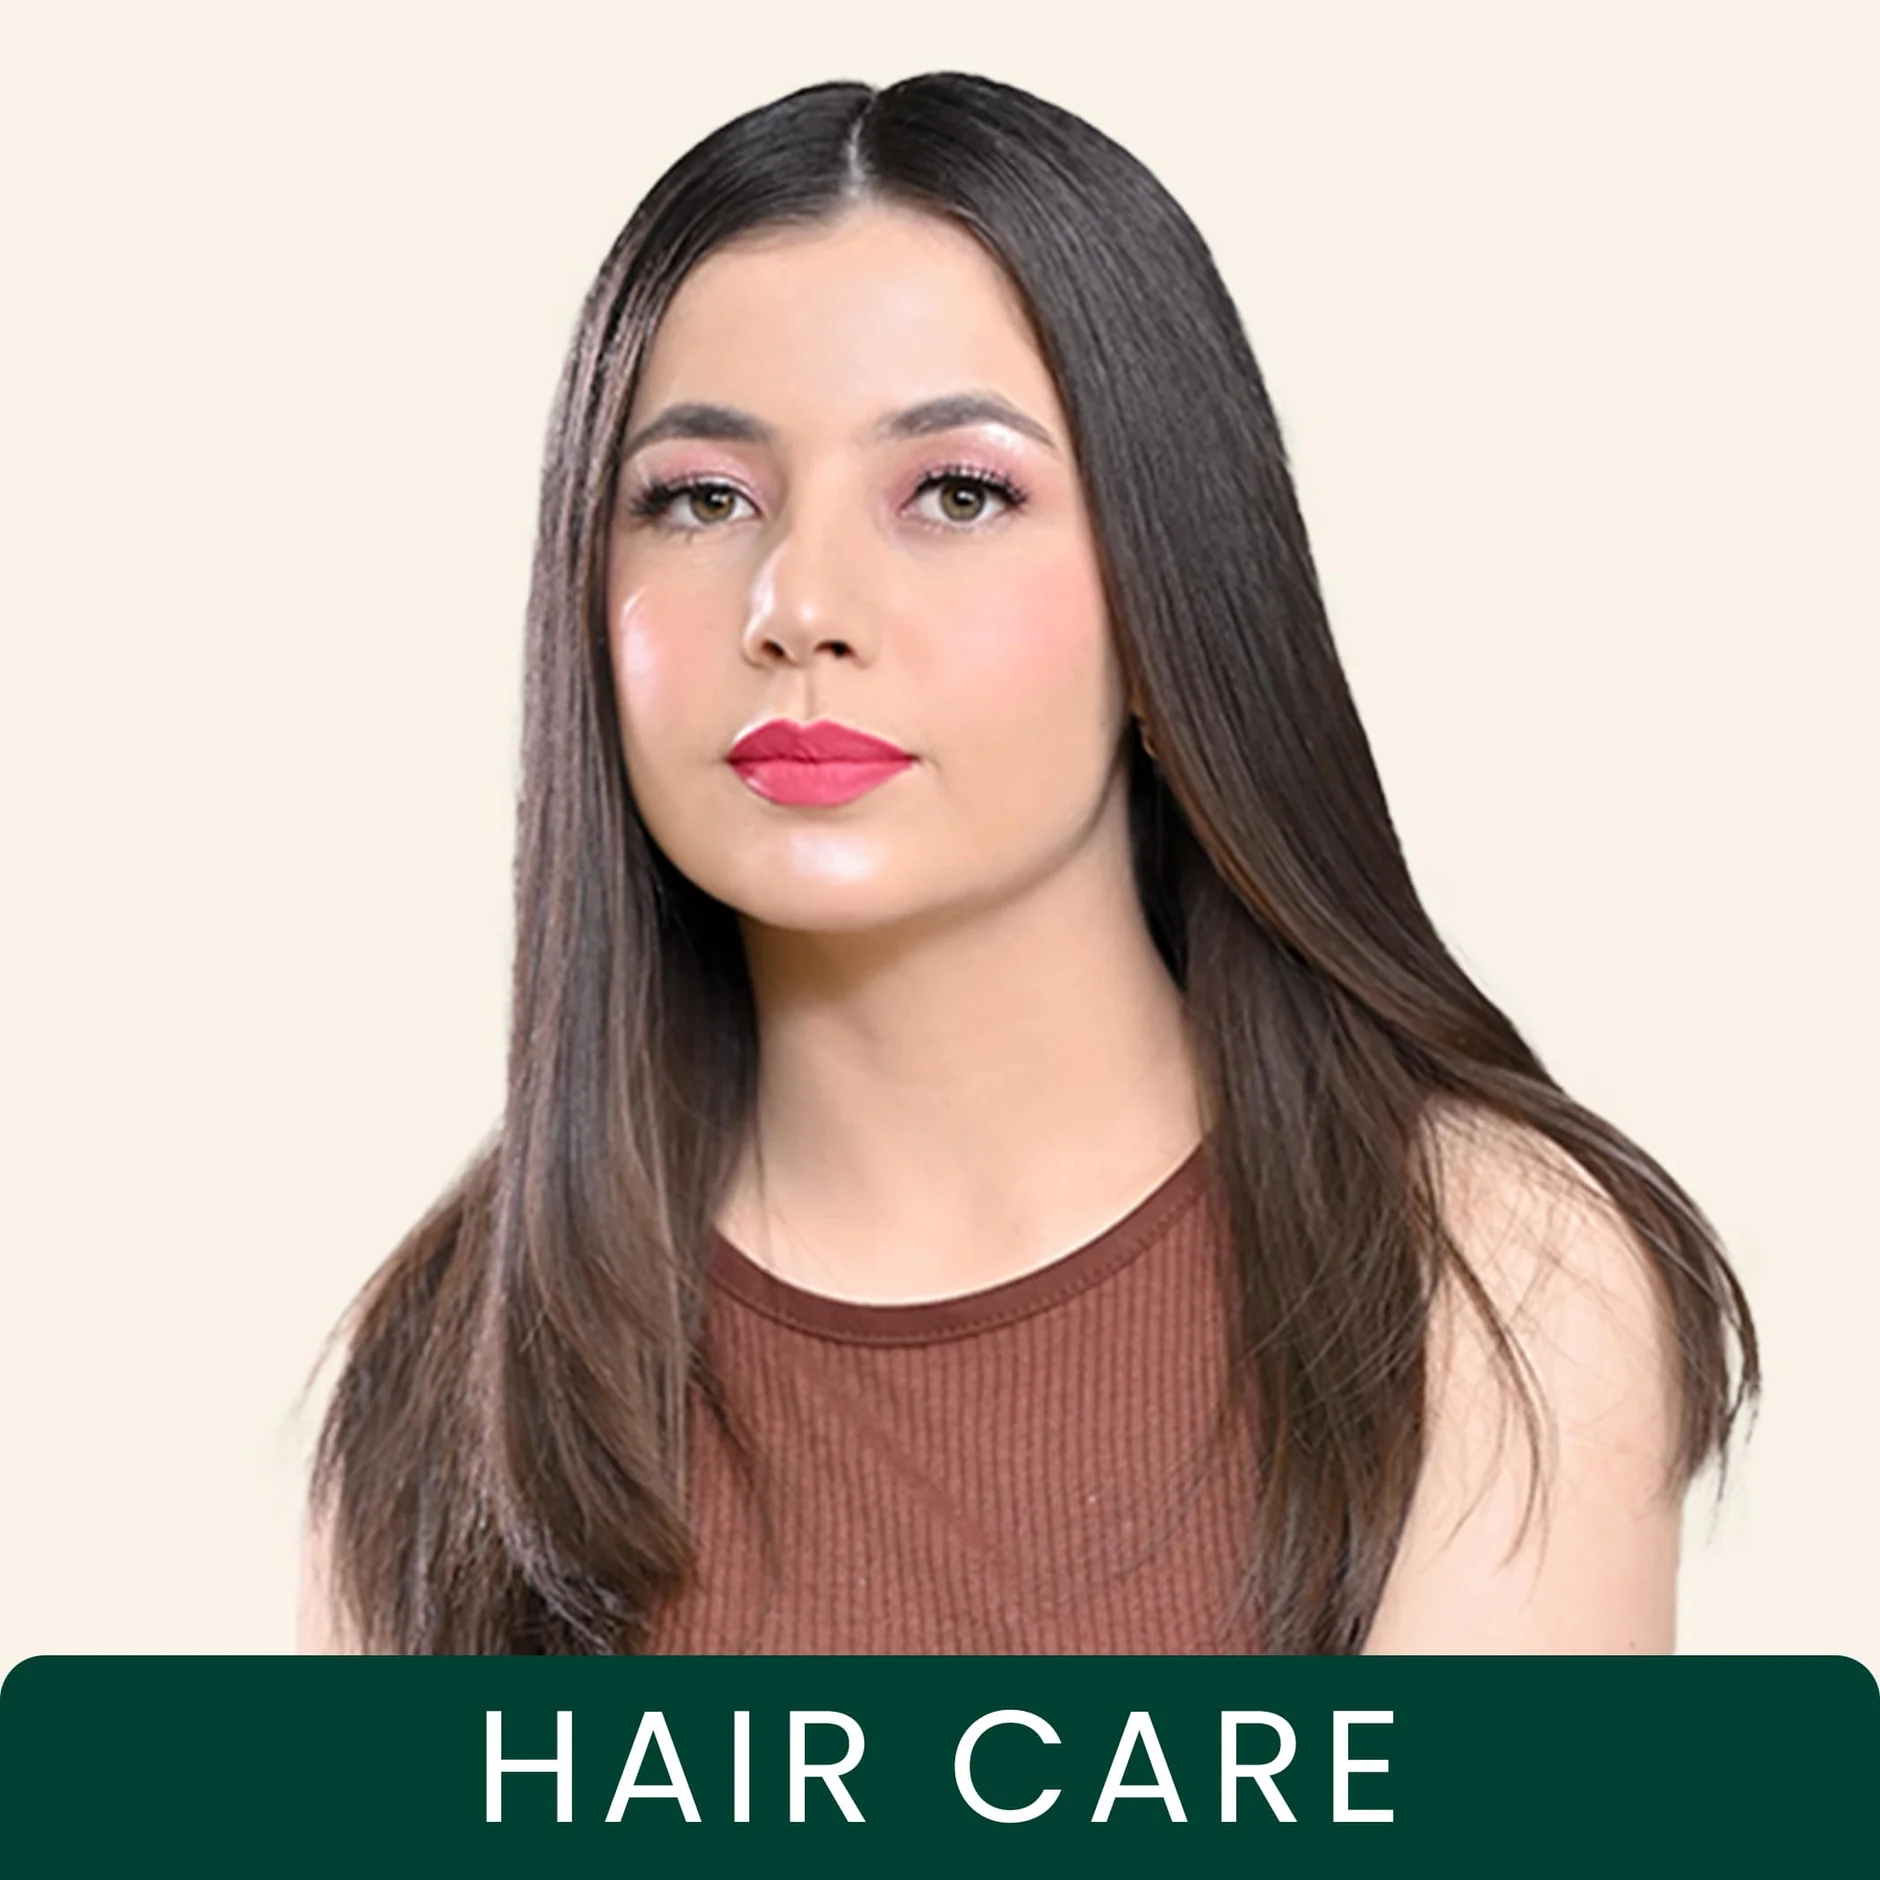 Organic Products for Haircare Benefits